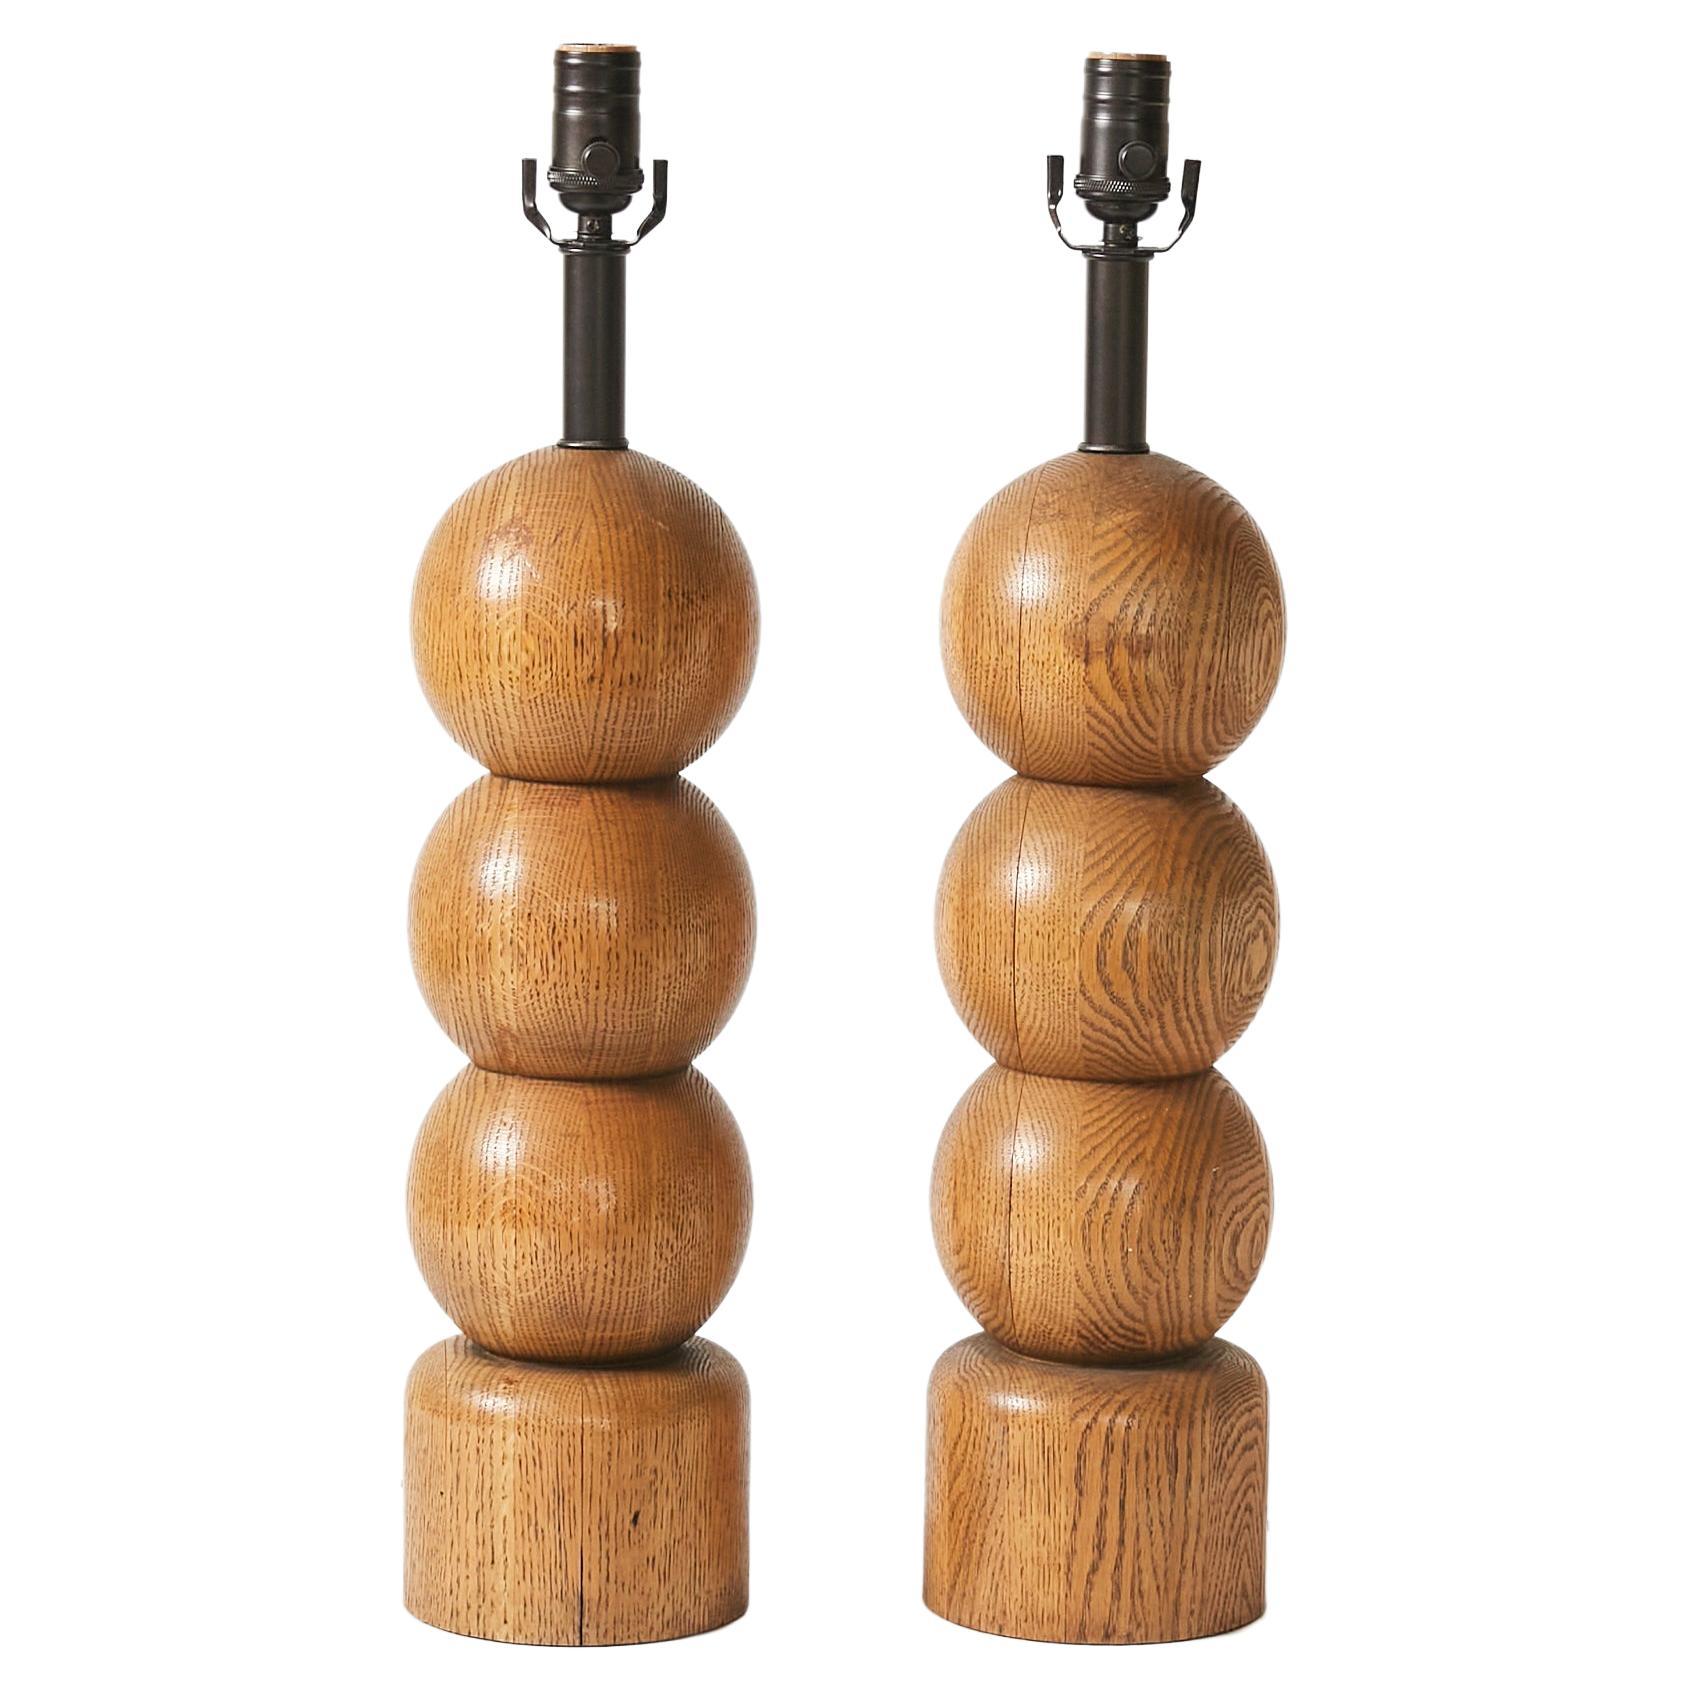 Set of Two Sculptural Wooden Spheres Table Lamps